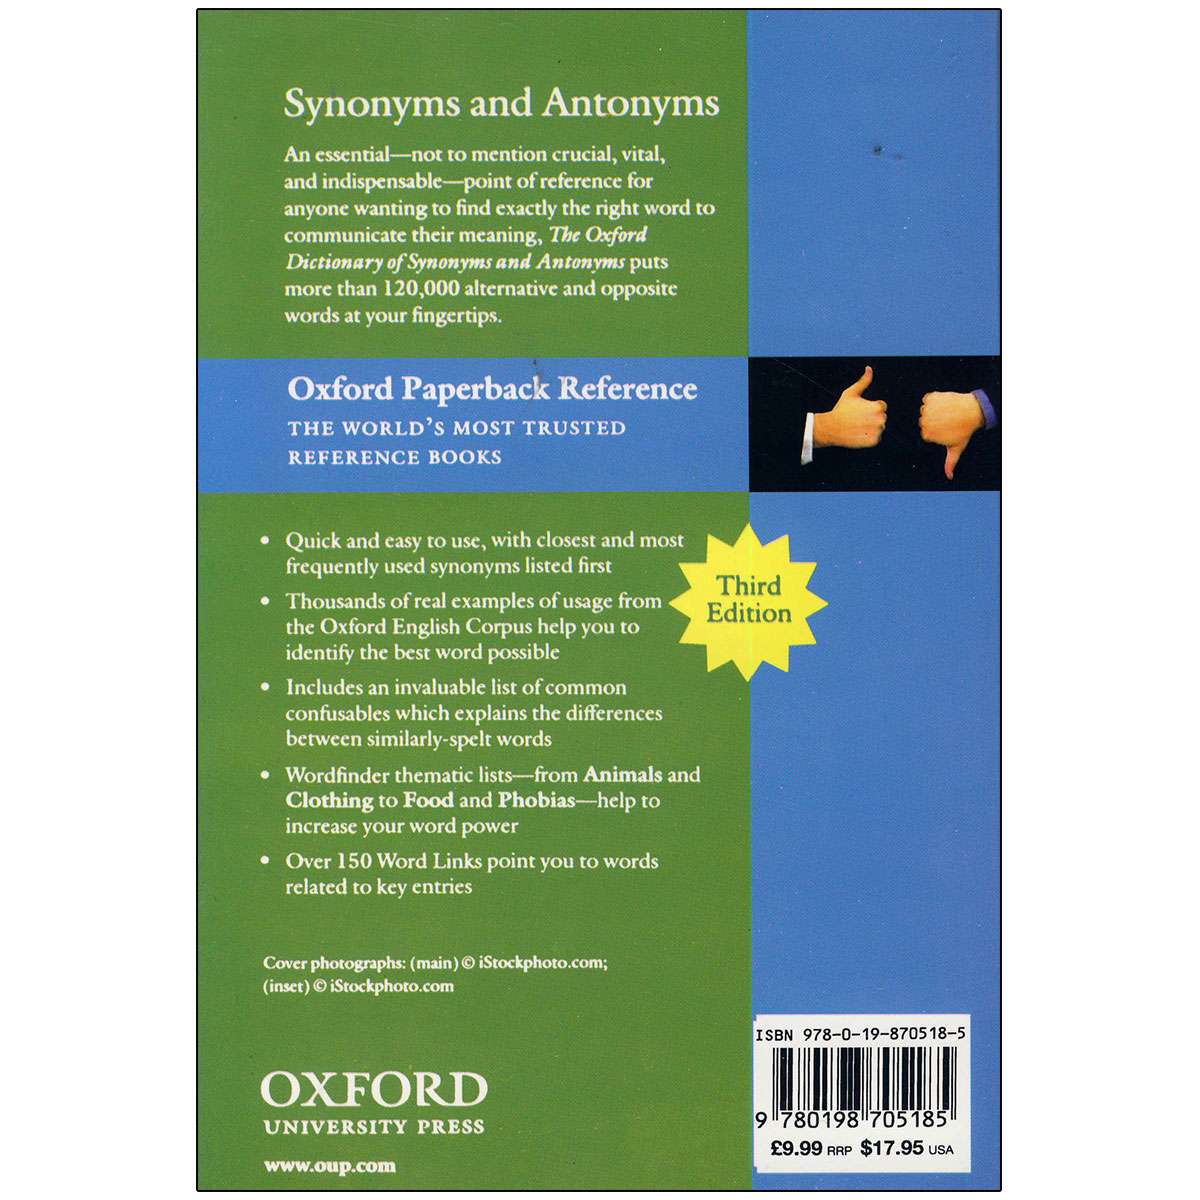 Oxford-Dictionary-of-Synonyms-and-Antonyms-back